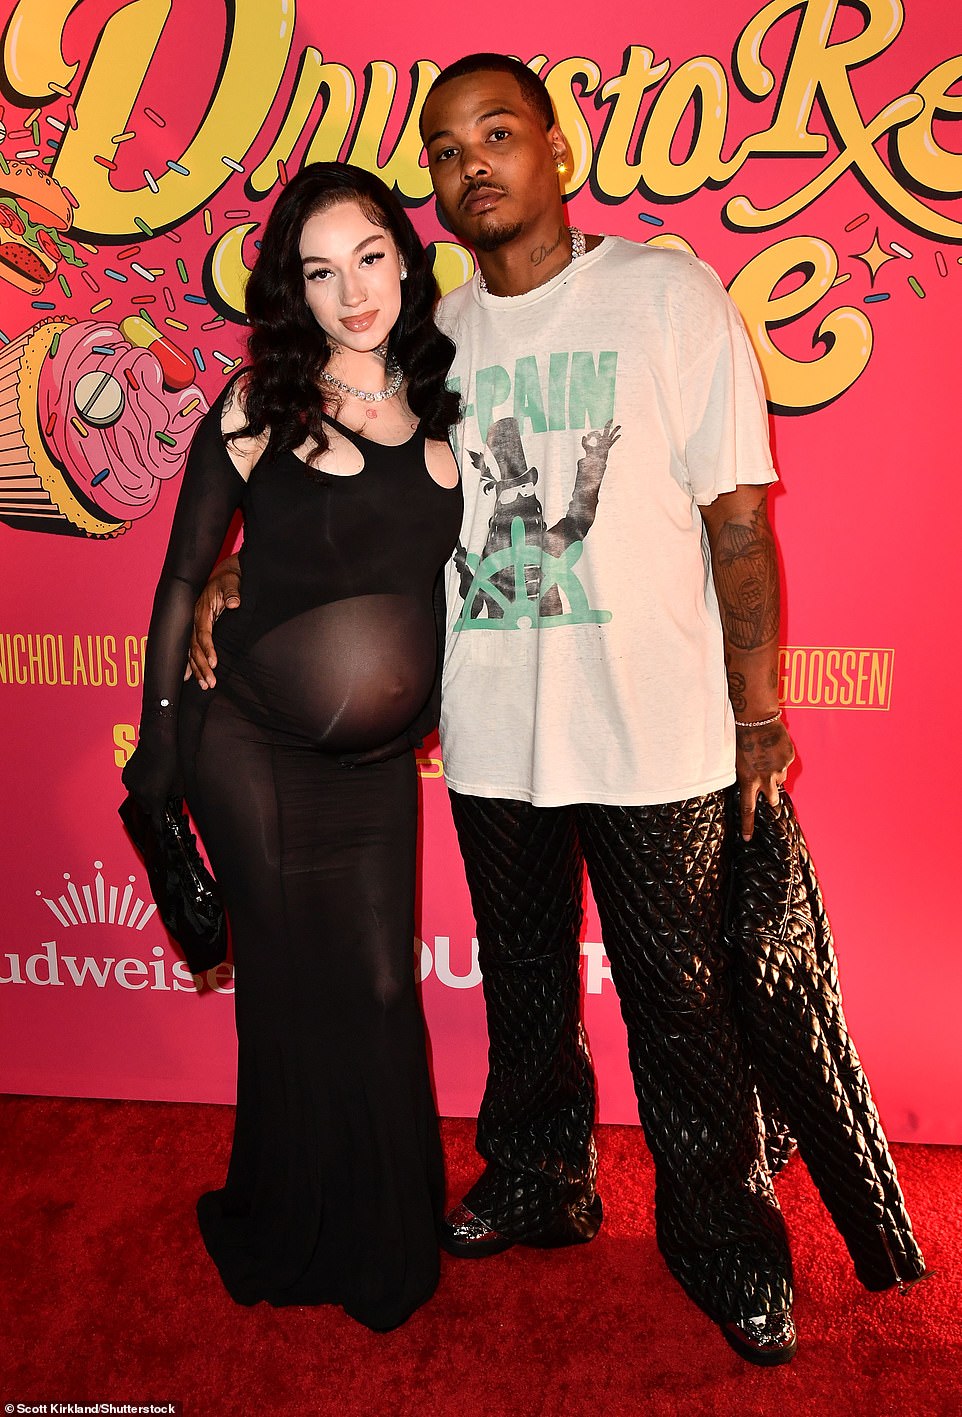 The pregnant 20-year-old and the 25-year-old influencer, who both have their names tattooed, hosted a Valentine's Day-themed baby shower for their unborn daughter, Kali Love, earlier this month.